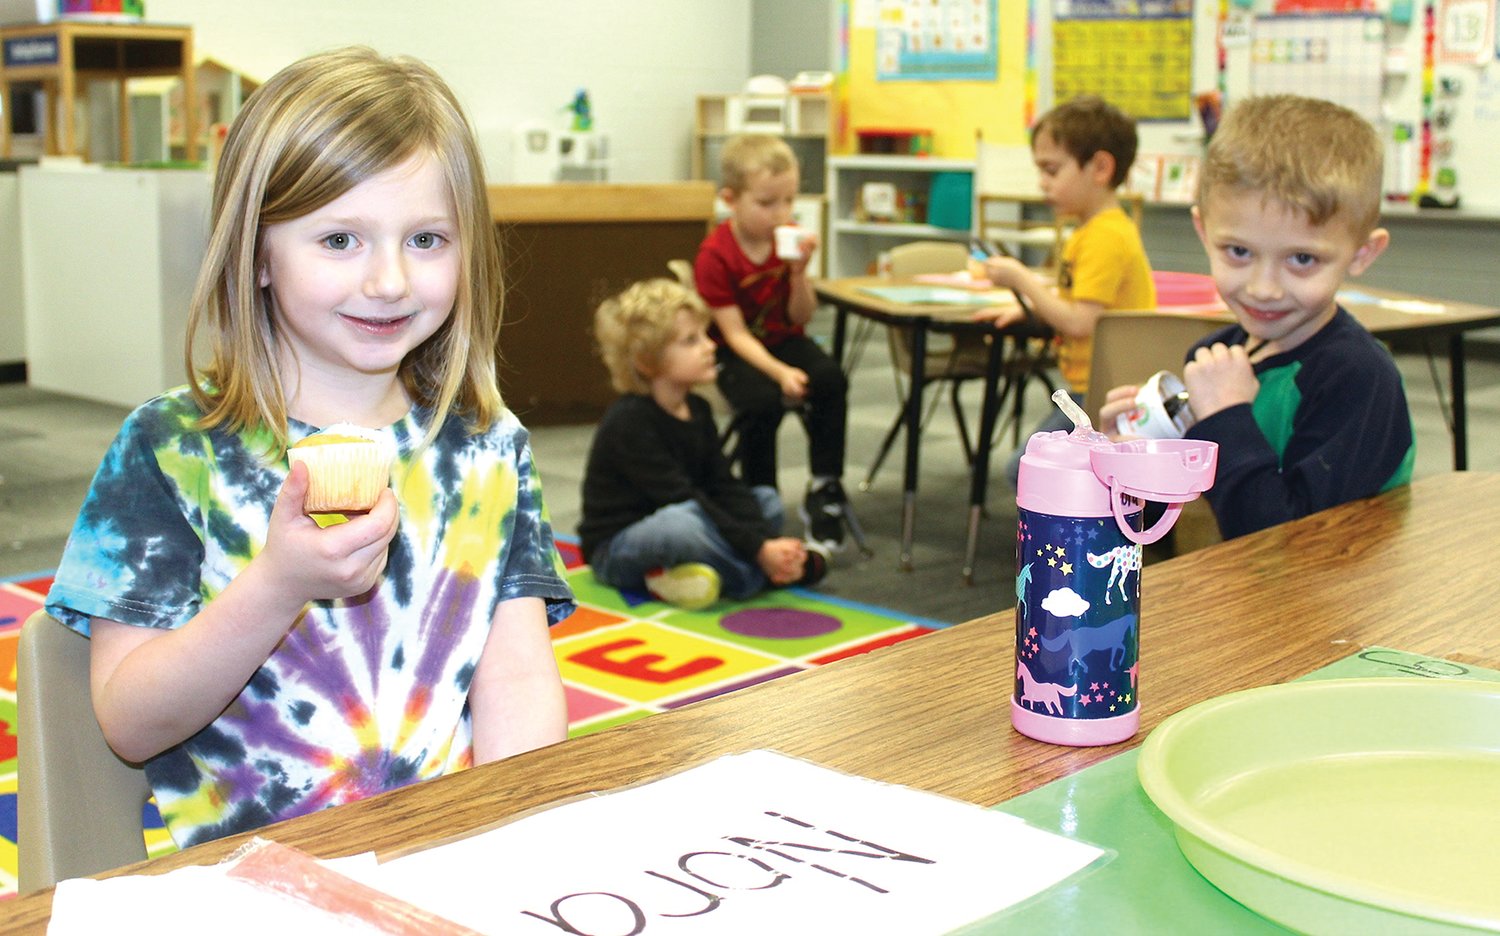 Little Mountie Preschool students Nora Stetler, left, and Levi Rhodes enjoy a snack before the end of the school day Wednesday at Walnut Elementary.